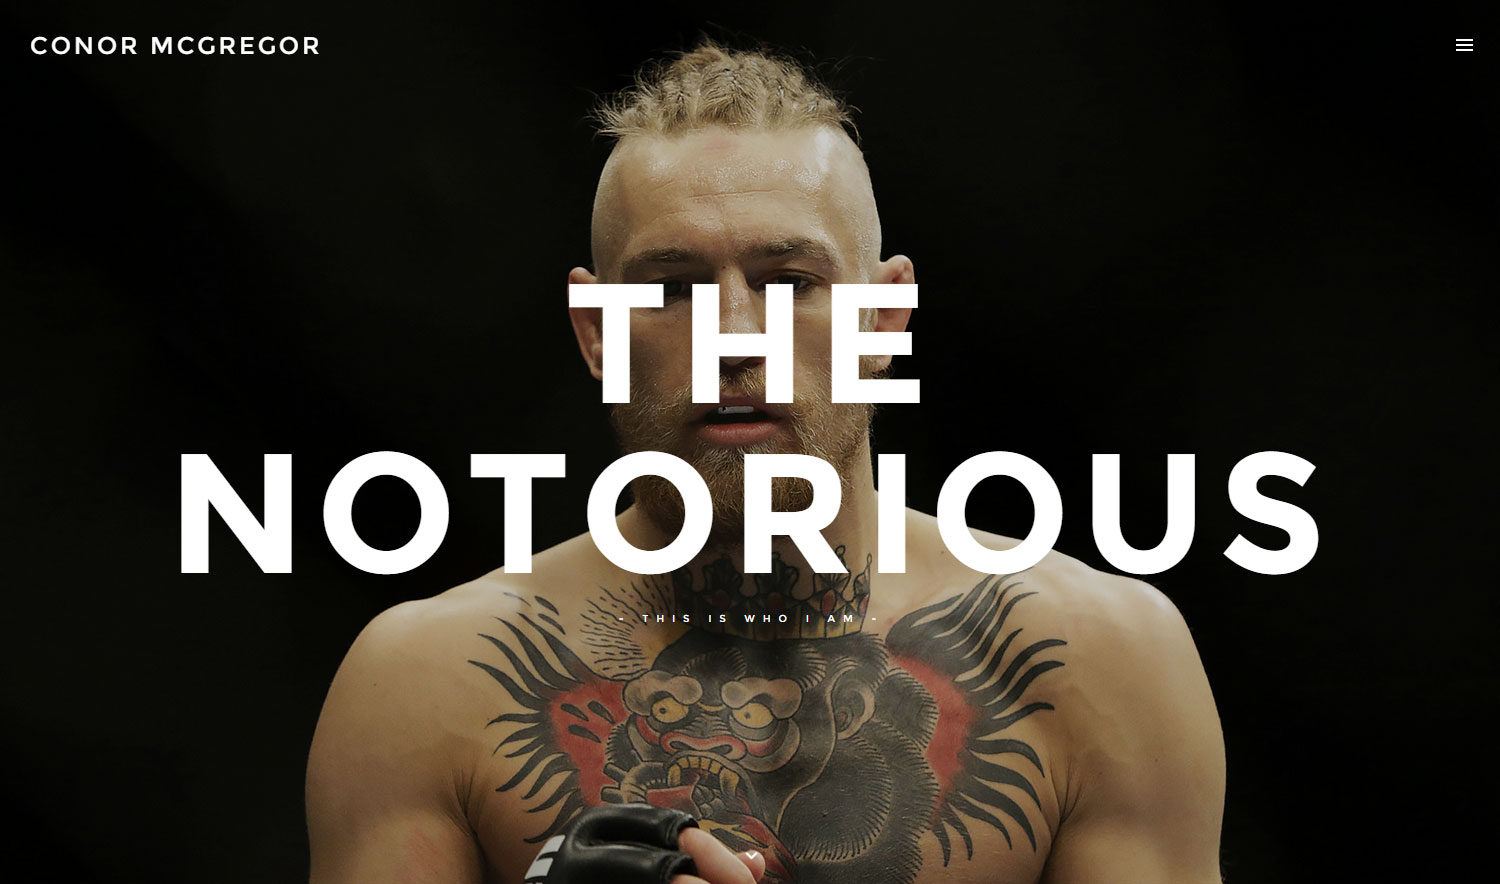 Conor McGregor - Website of the Day